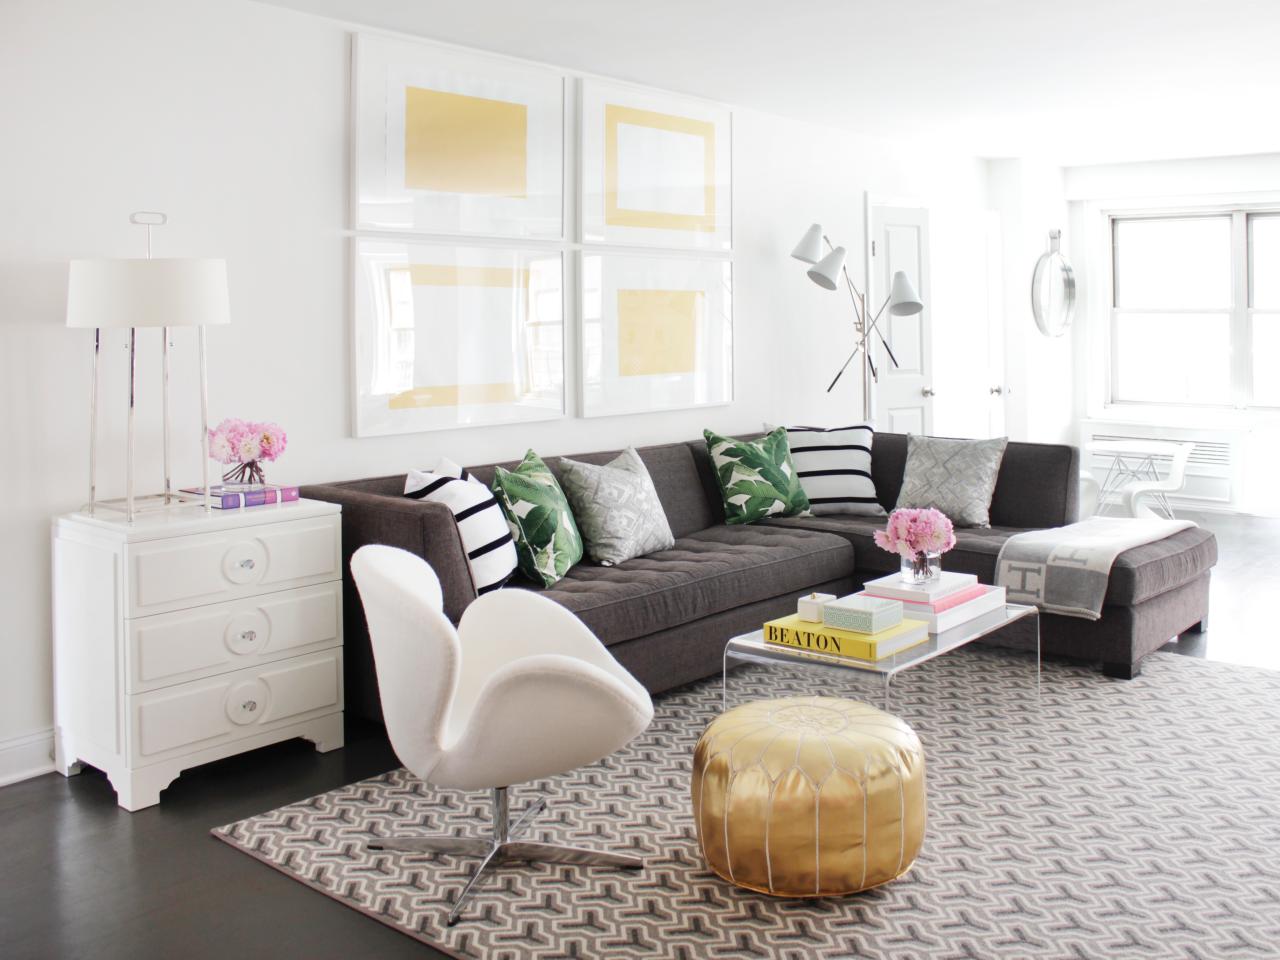 12 Living Room Ideas For A Grey Sectional HGTVs Decorating